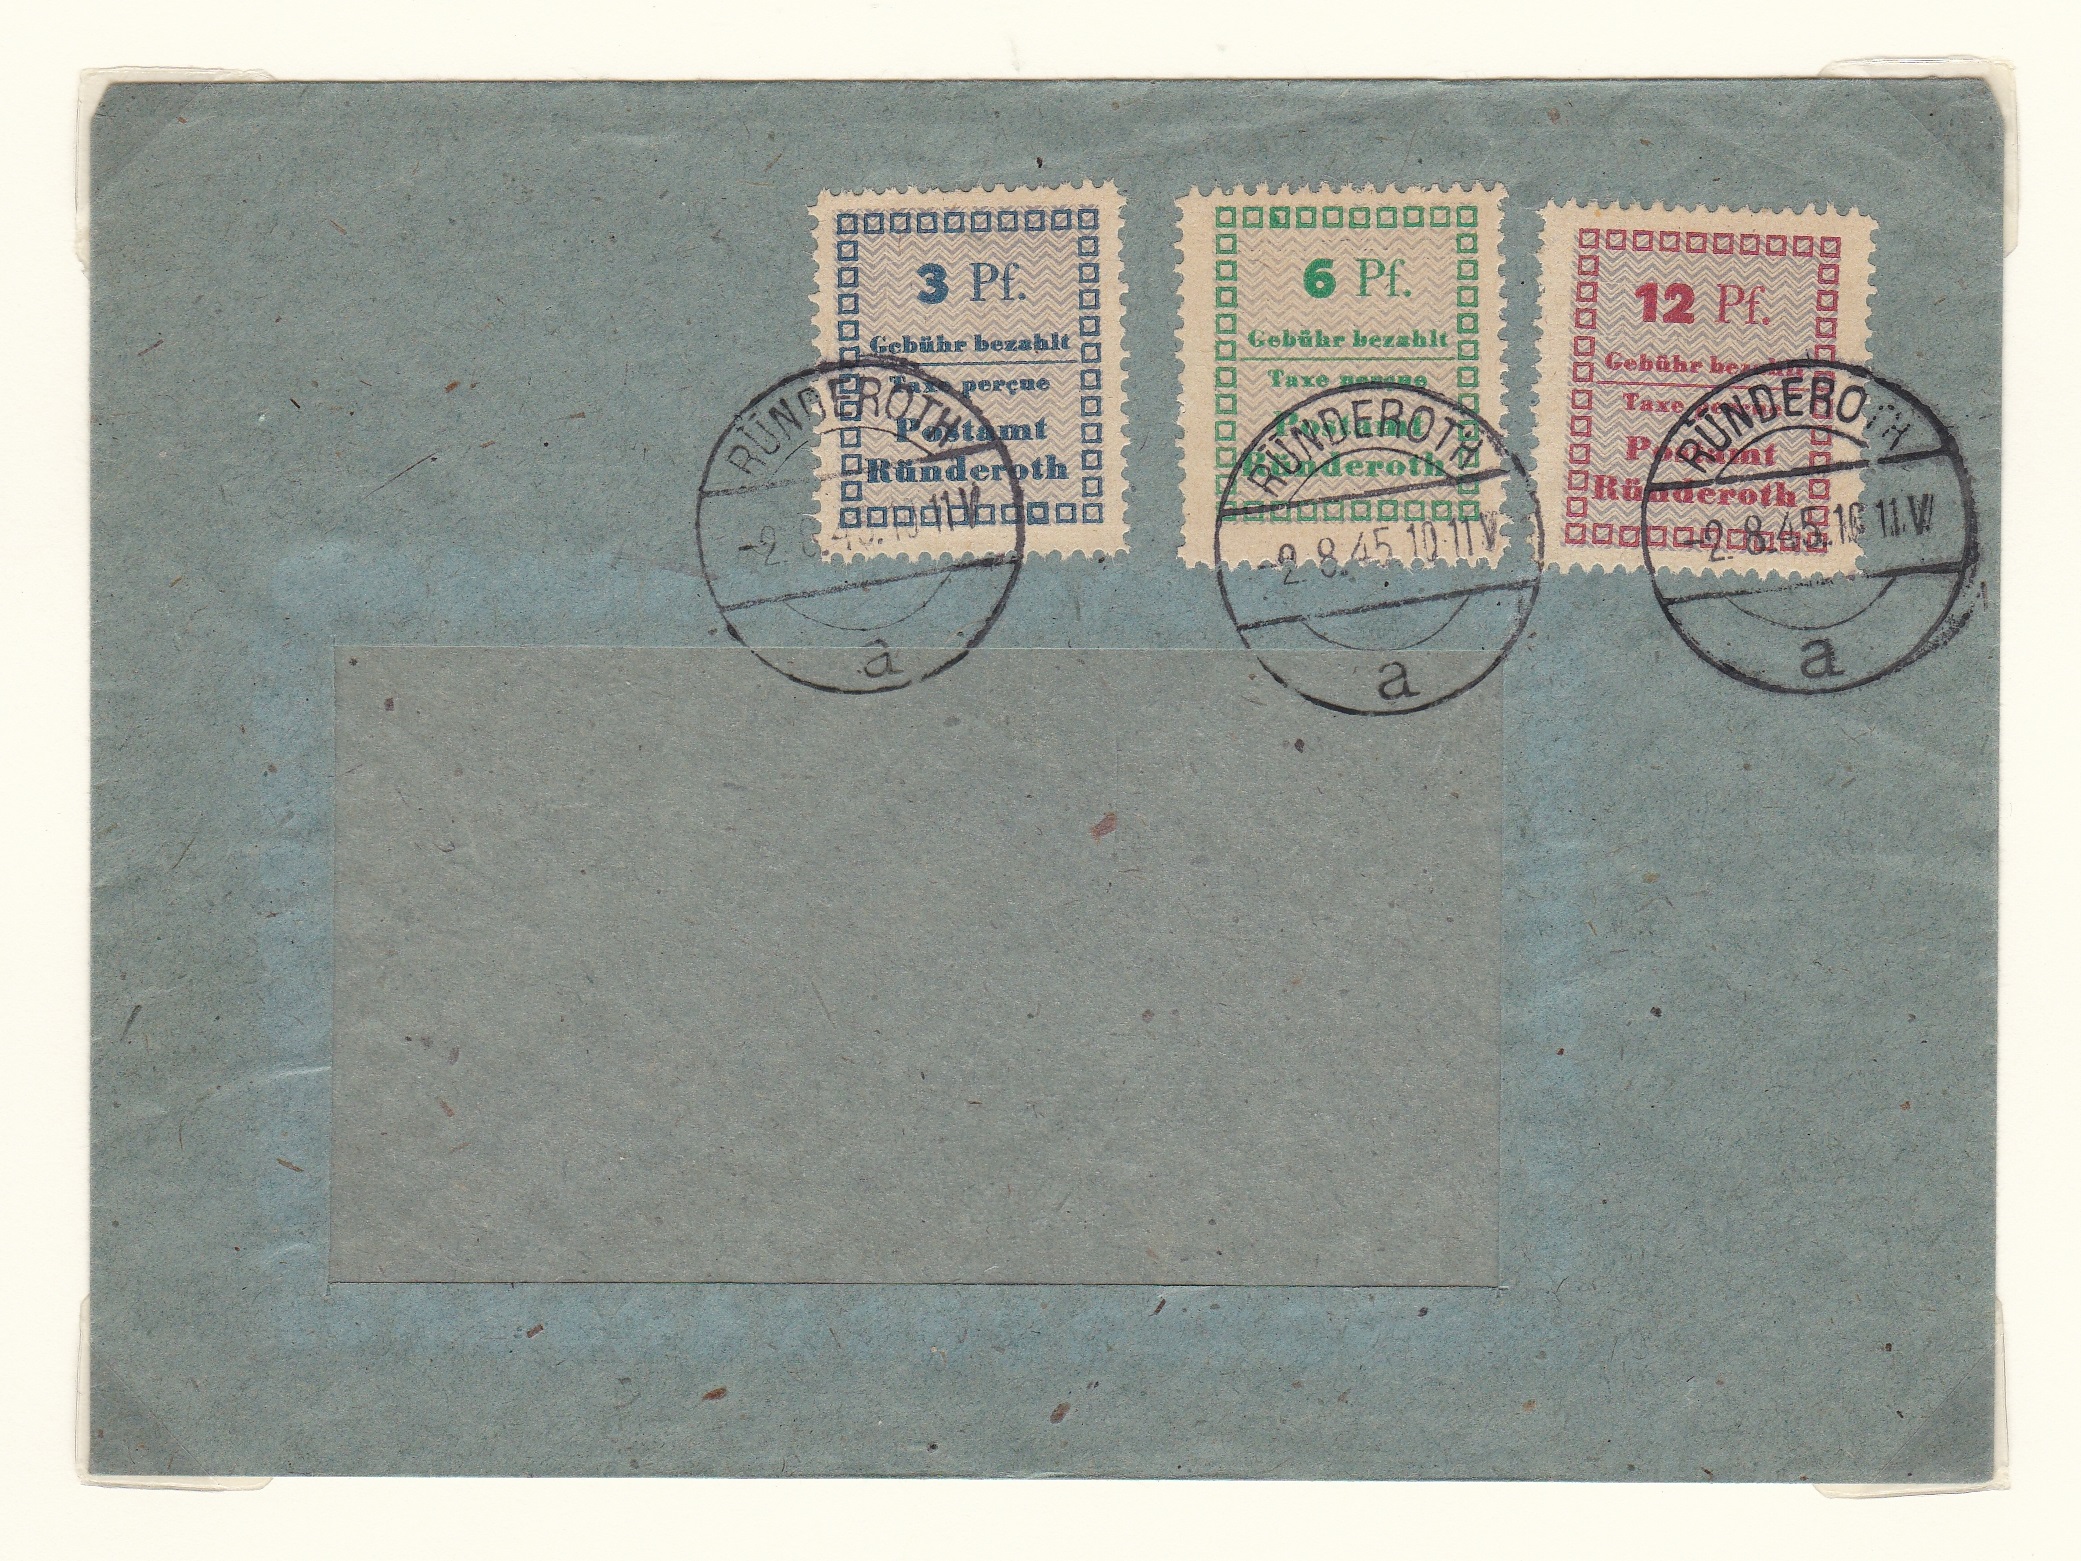 Germany 1945 Local Issue Runderoth Env cancel 2.8.1945 on Michel 1a-3a Gustav Jaeger company